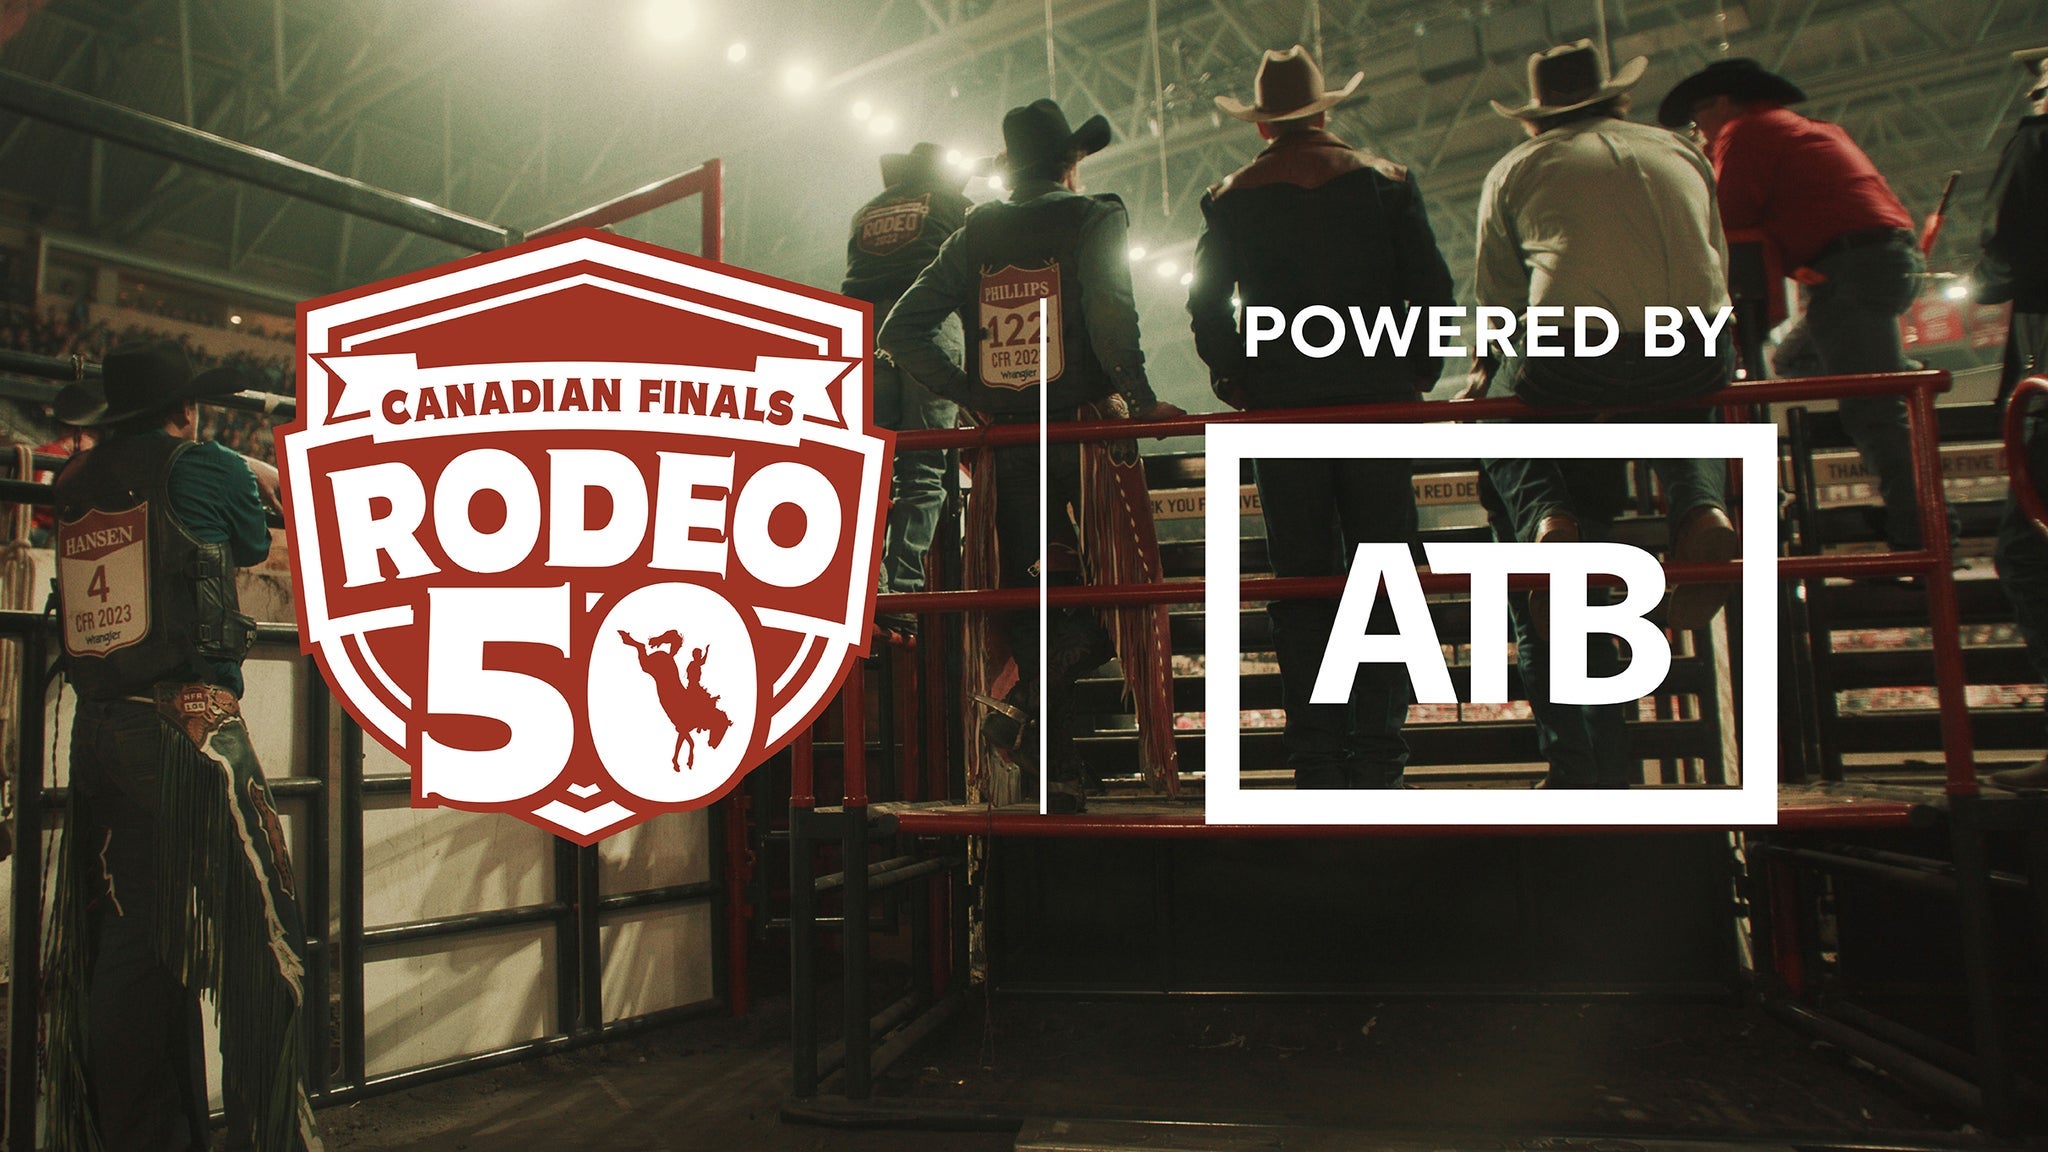 Canadian Finals Rodeo powered by ATB